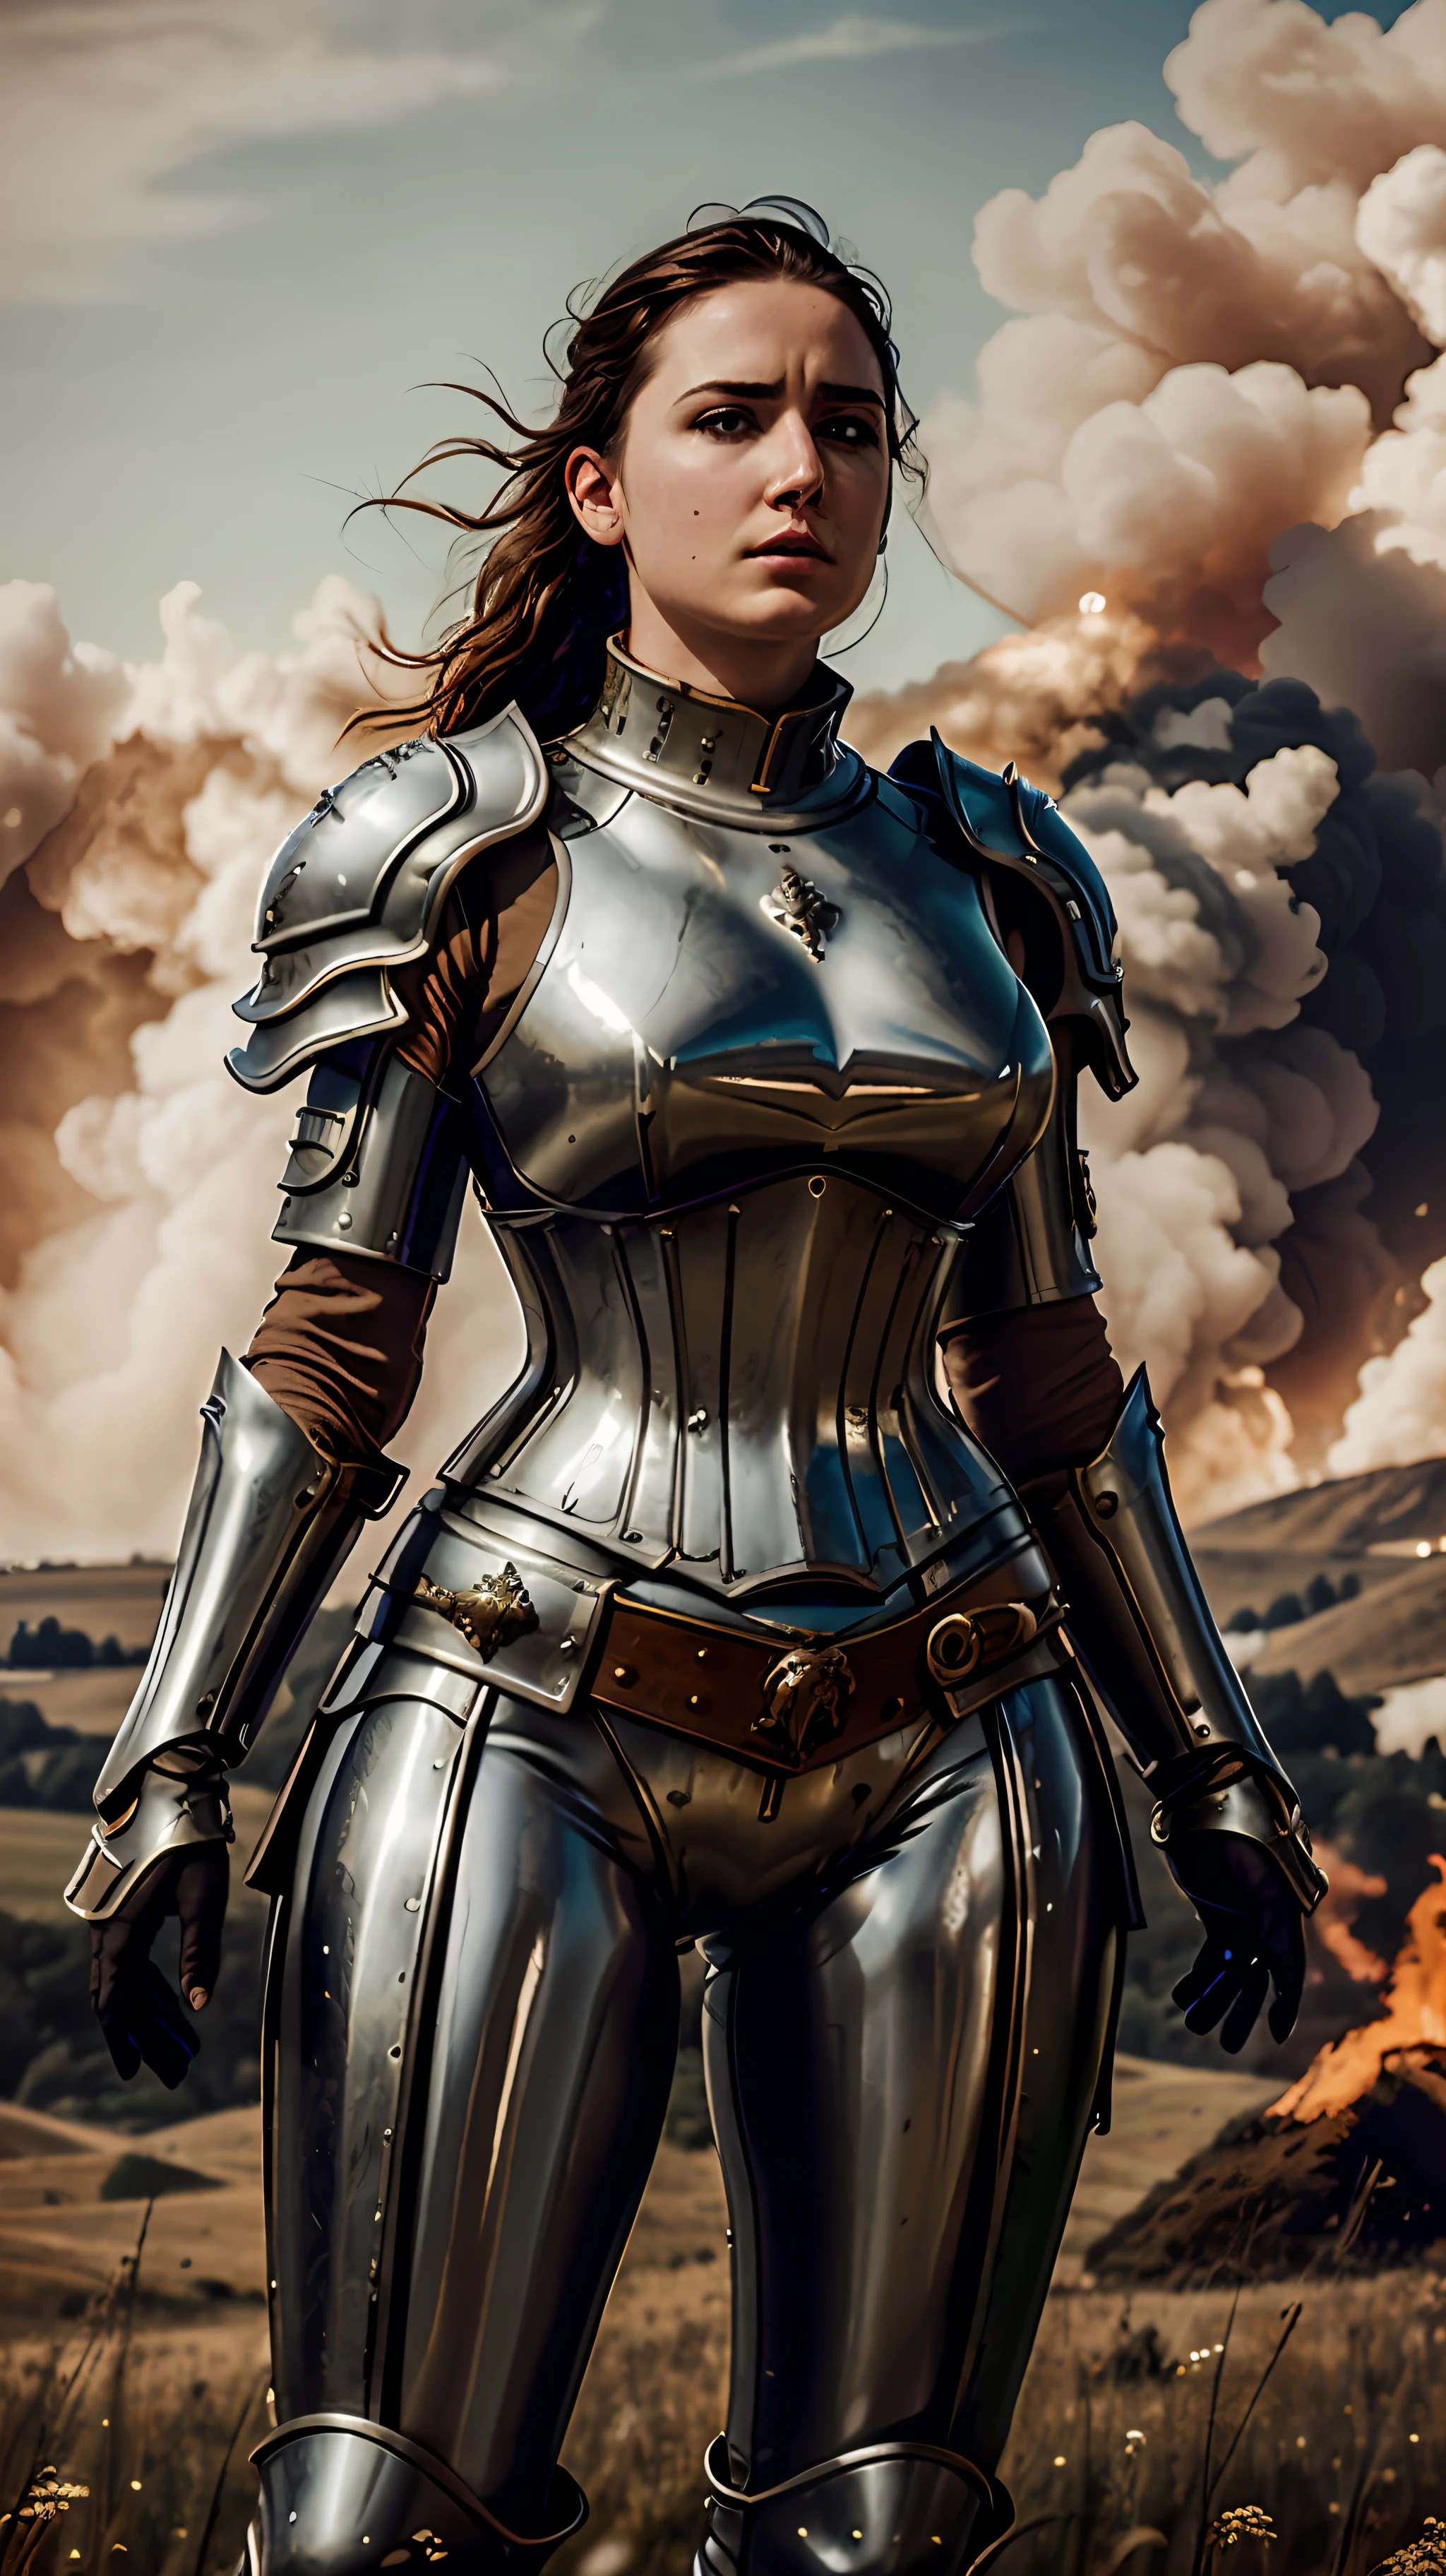 Masterpiece, cinematic landscape, best quality, baroque, realistic, european woman, beautiful curves, white roman medieval armor, worn armor, upper body, looking at the viewer, open field, battlefield, catapult, fire and smoke